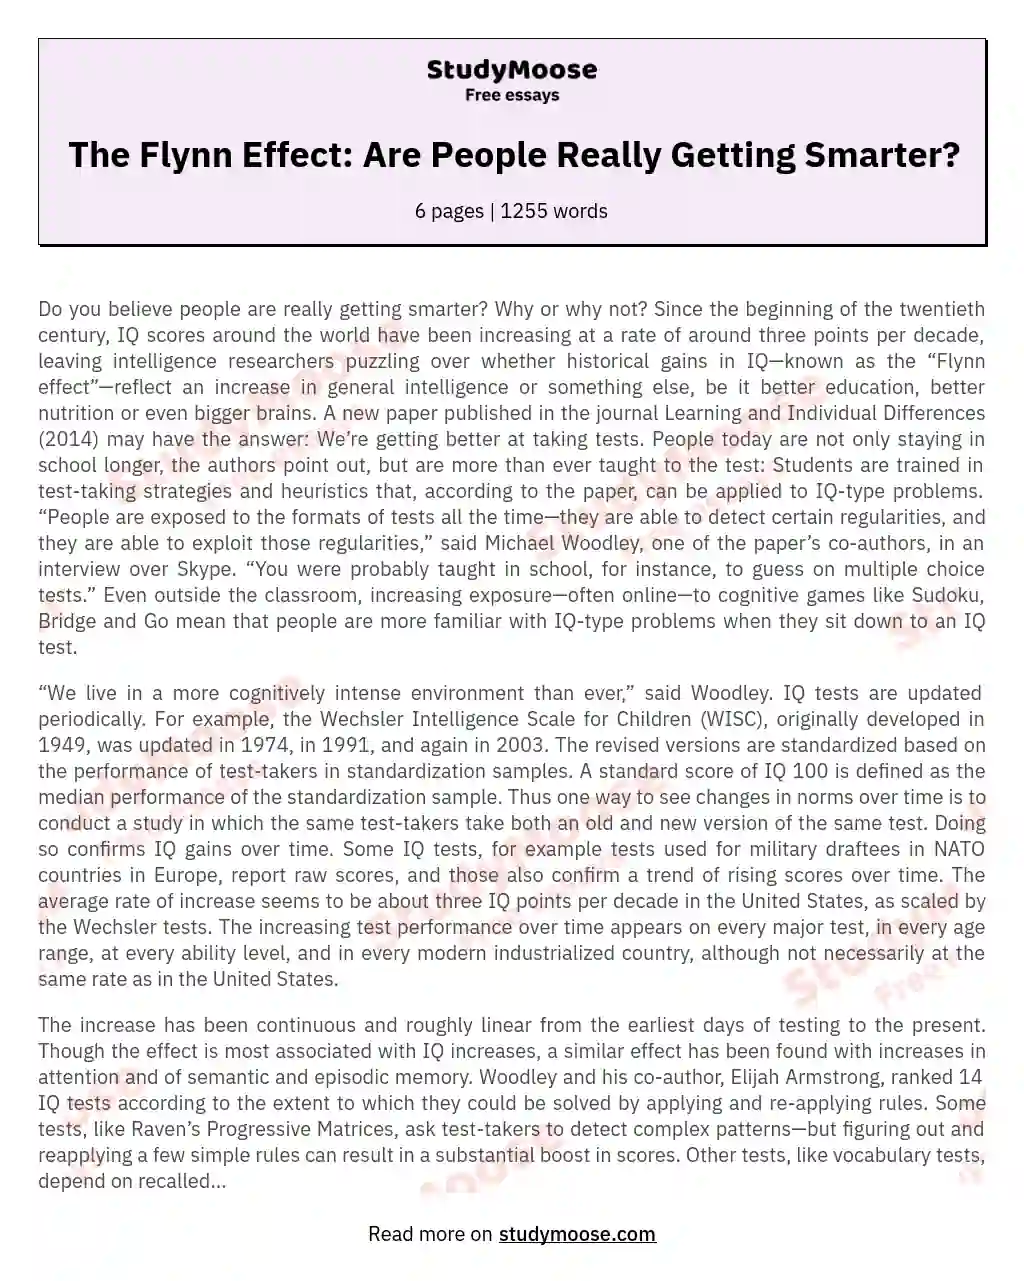 The Flynn Effect: IQ Scores and Evolving Intelligence essay